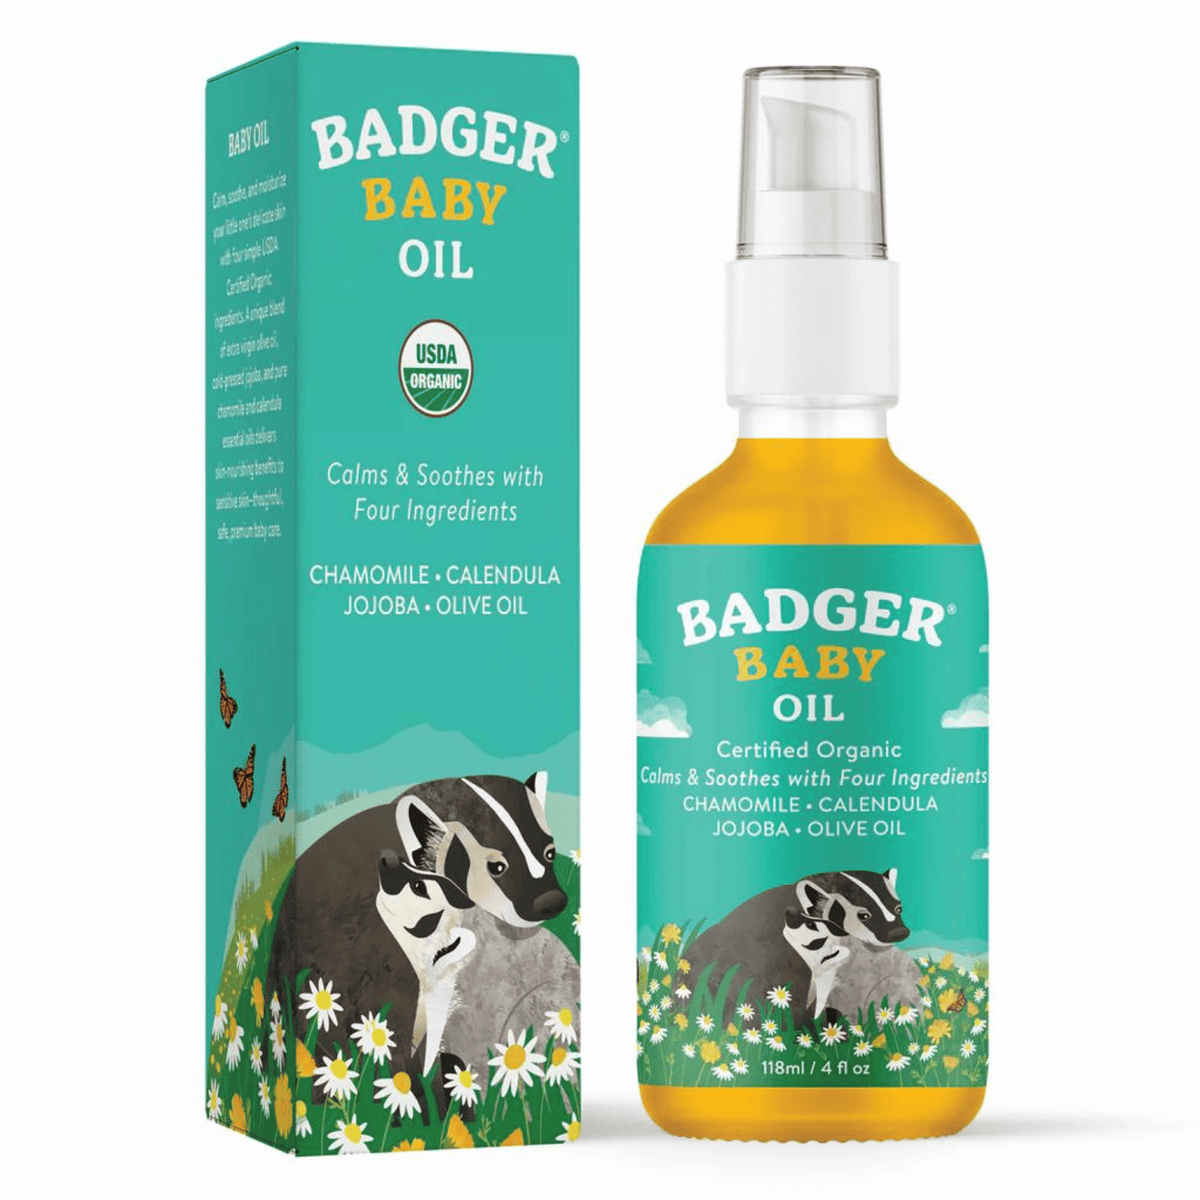 Primary Image of Badger Baby Oil